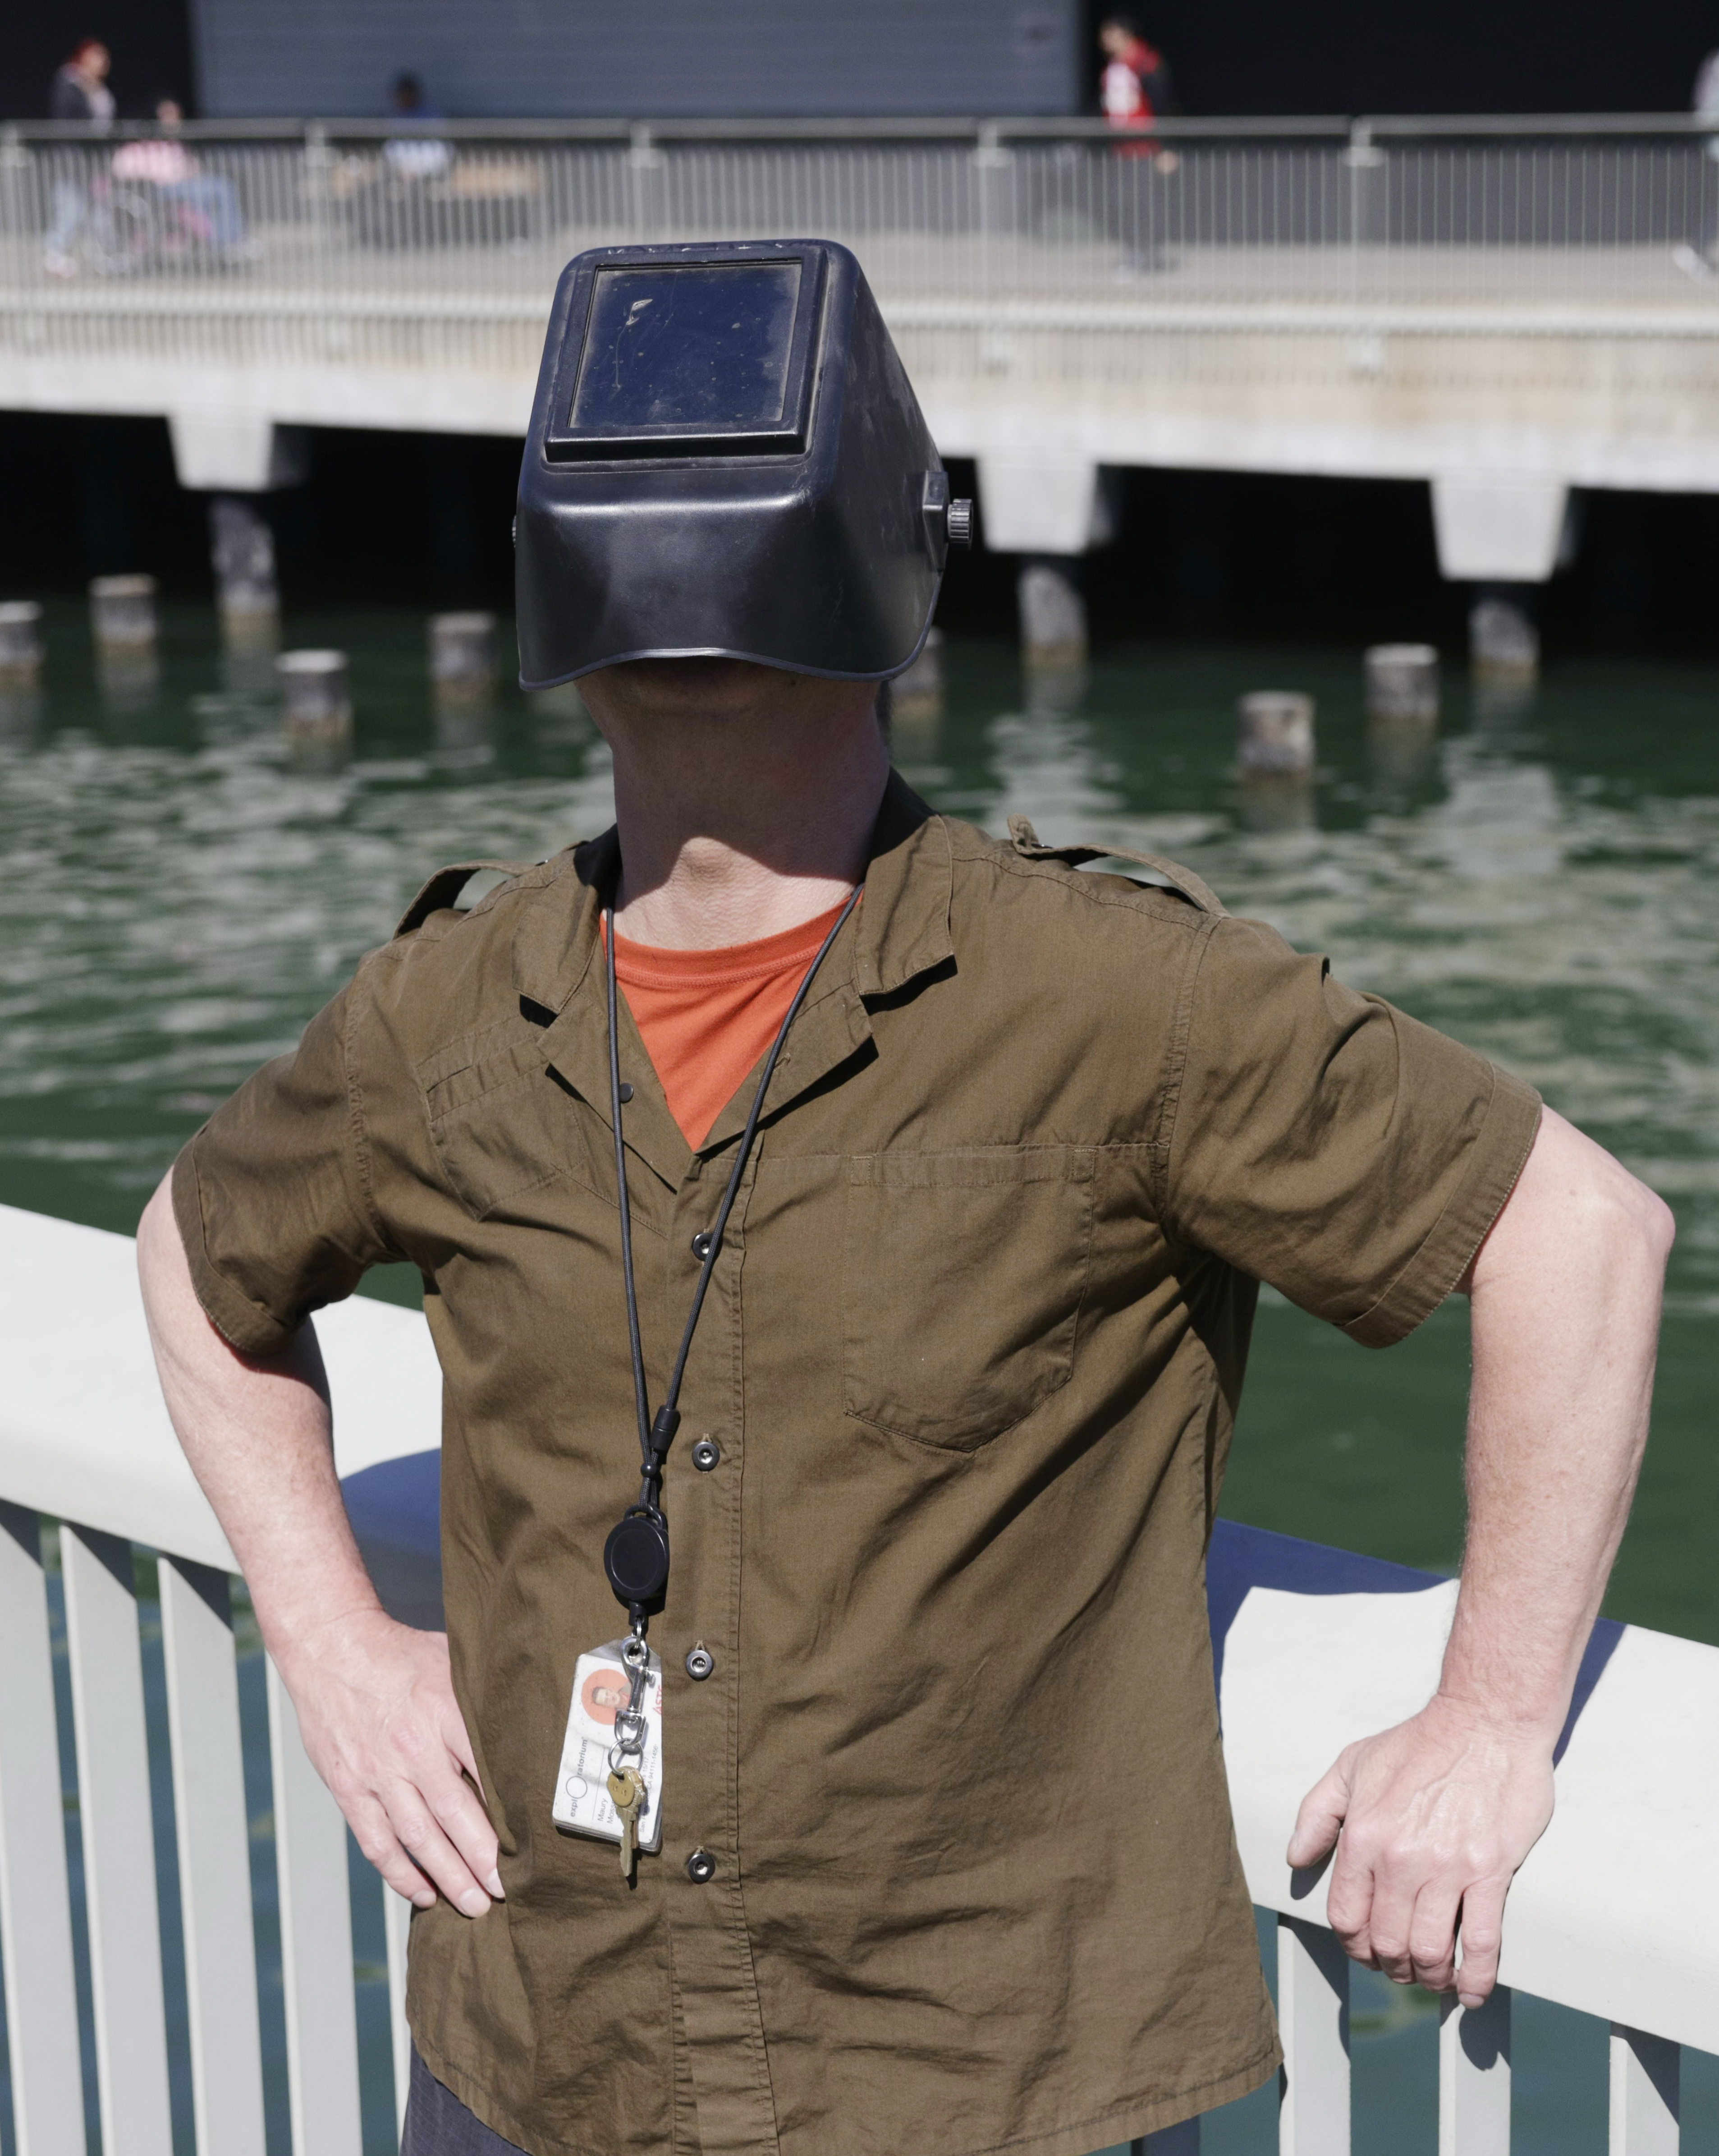 A person is standing by water, wearing a welding mask, khaki shirt, and an ID badge.